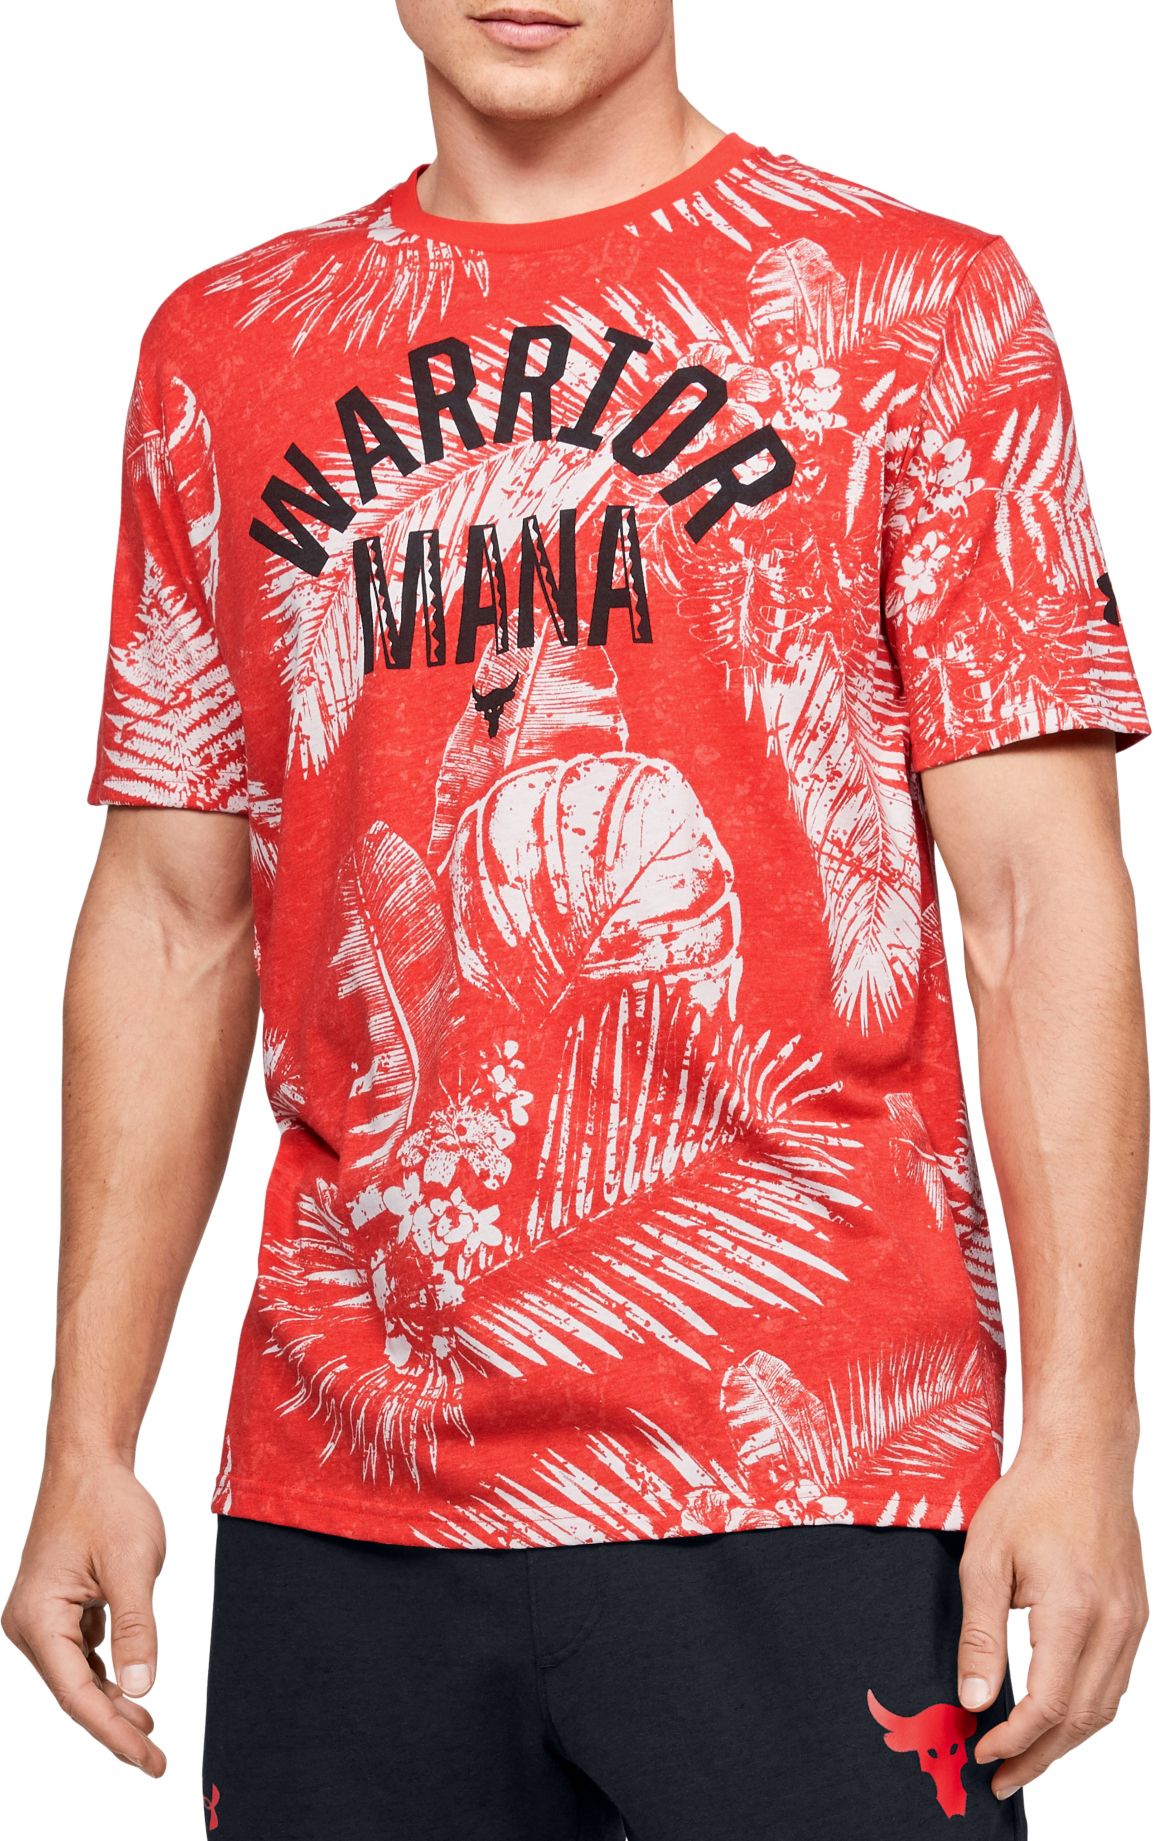 mana strong under armour